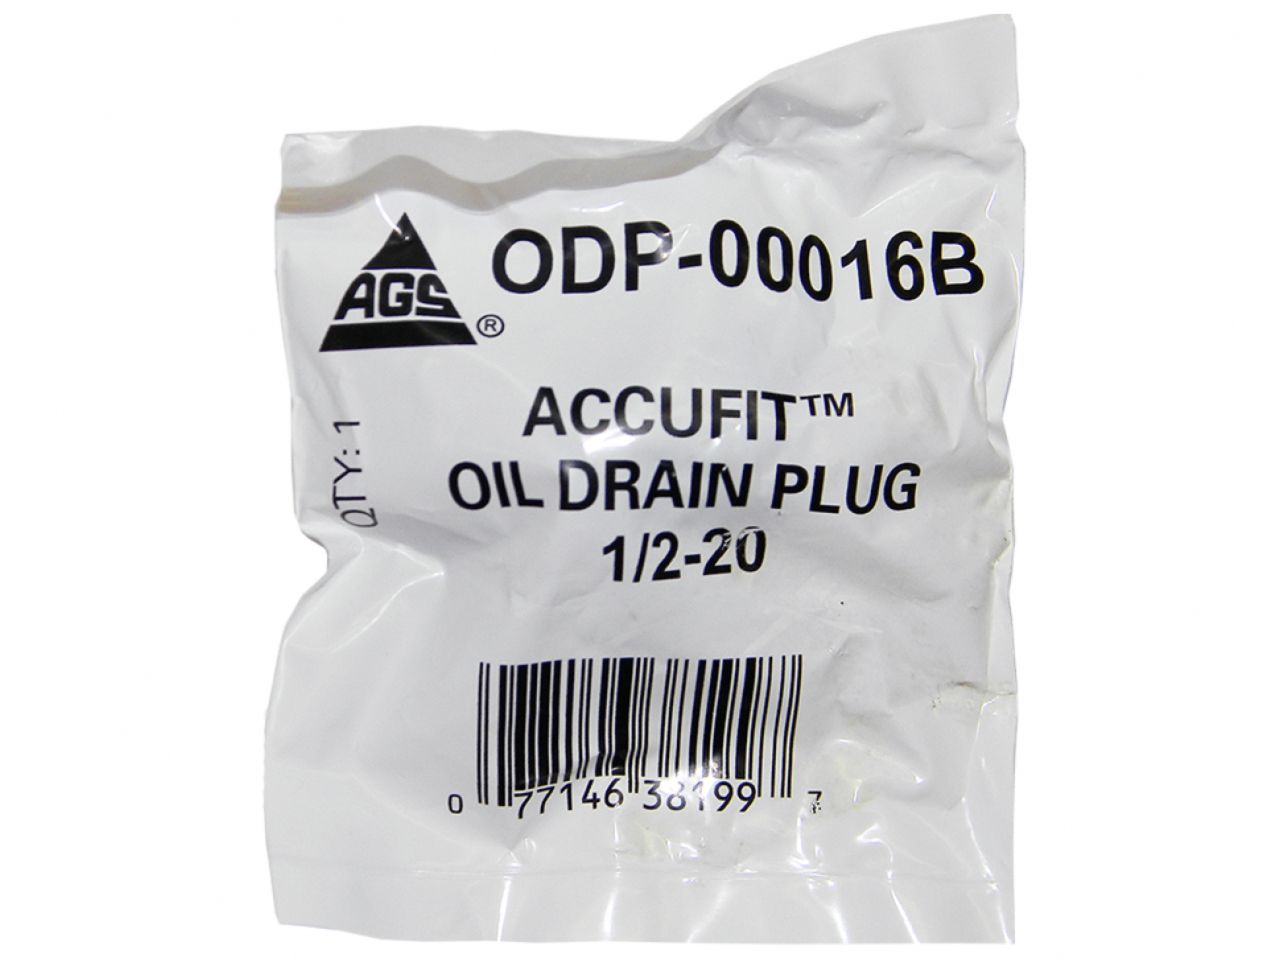 American Grease Stick (Ags) Drain Plugs ODP-00016B Item Image